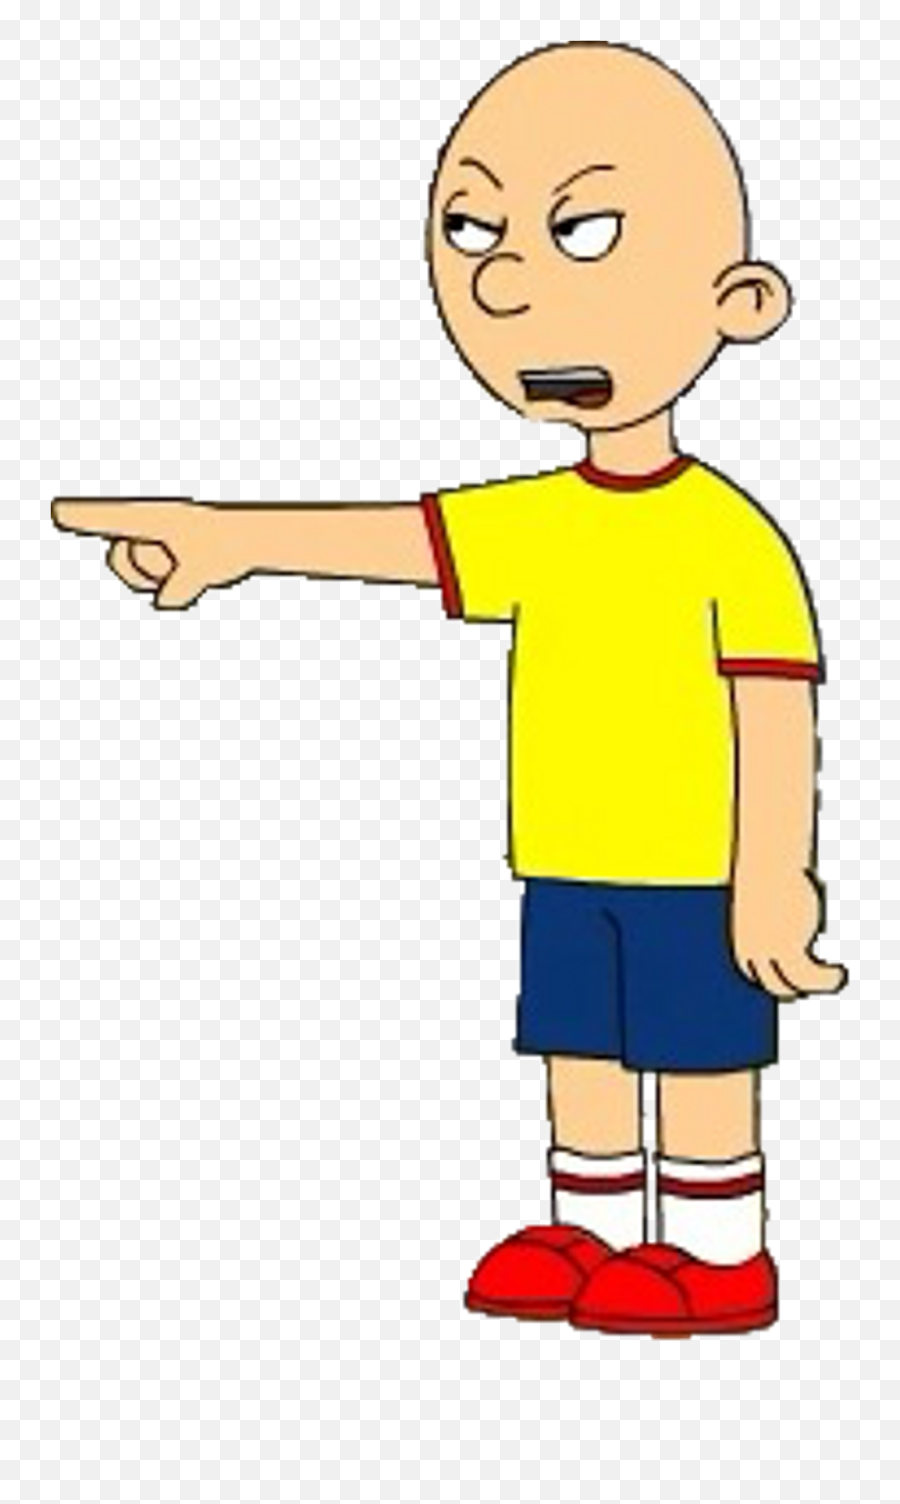 Caillou Goanimate - Caillou Goanimate Png,Caillou Png